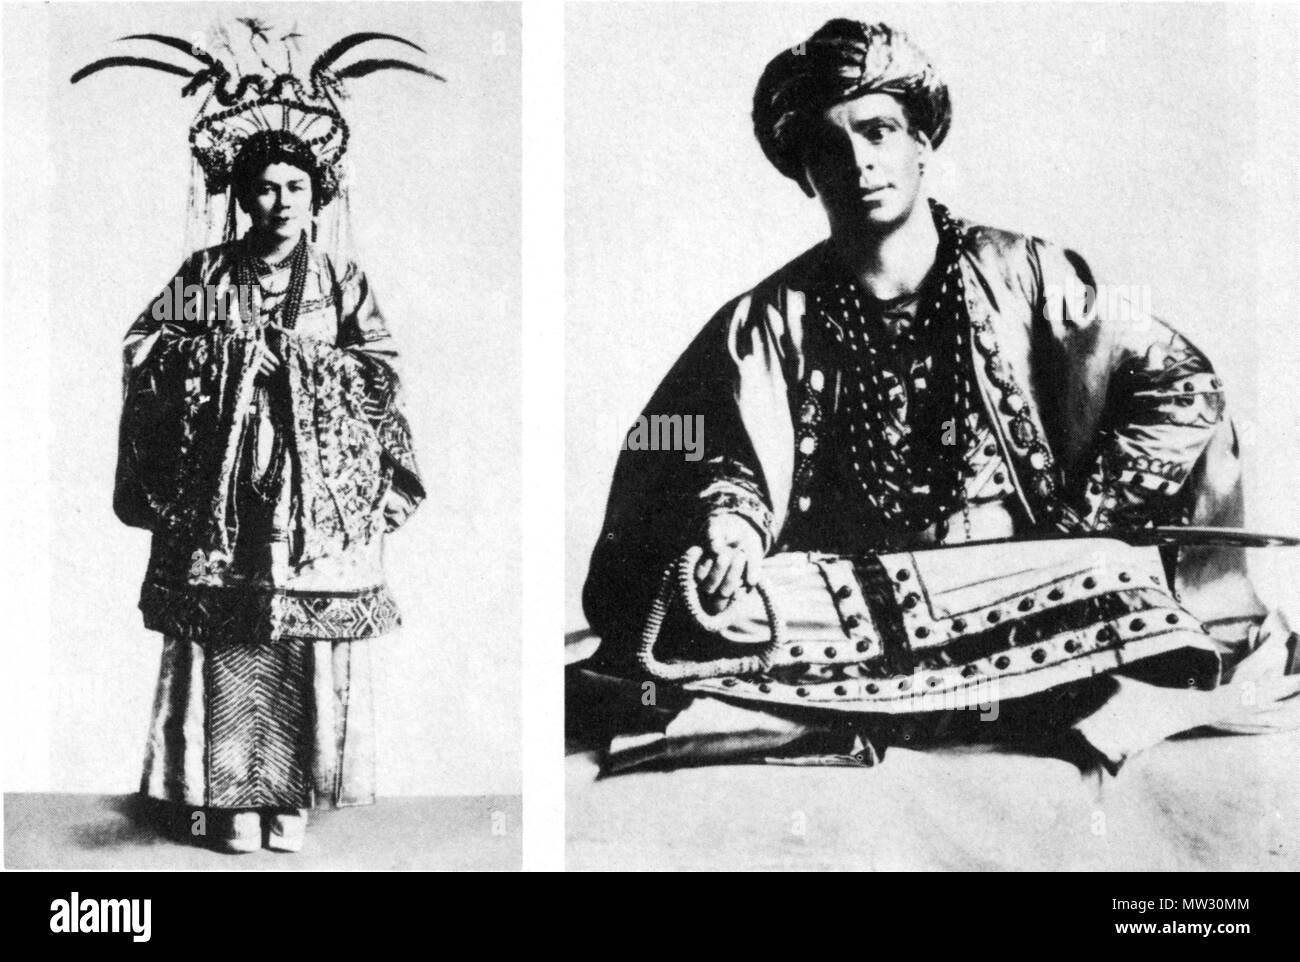 . English: Gertud Eysoldt as Turandot; Alexander Moissi as Calaf. Photos from the program book for Max Reinhardt's 1911 production of Gozzi's Turandot with incidental music by Ferruccio Busoni. First published 1911.. Unknown 81 Berlin 1911 - Eysoldt &amp; Moissi Stock Photo